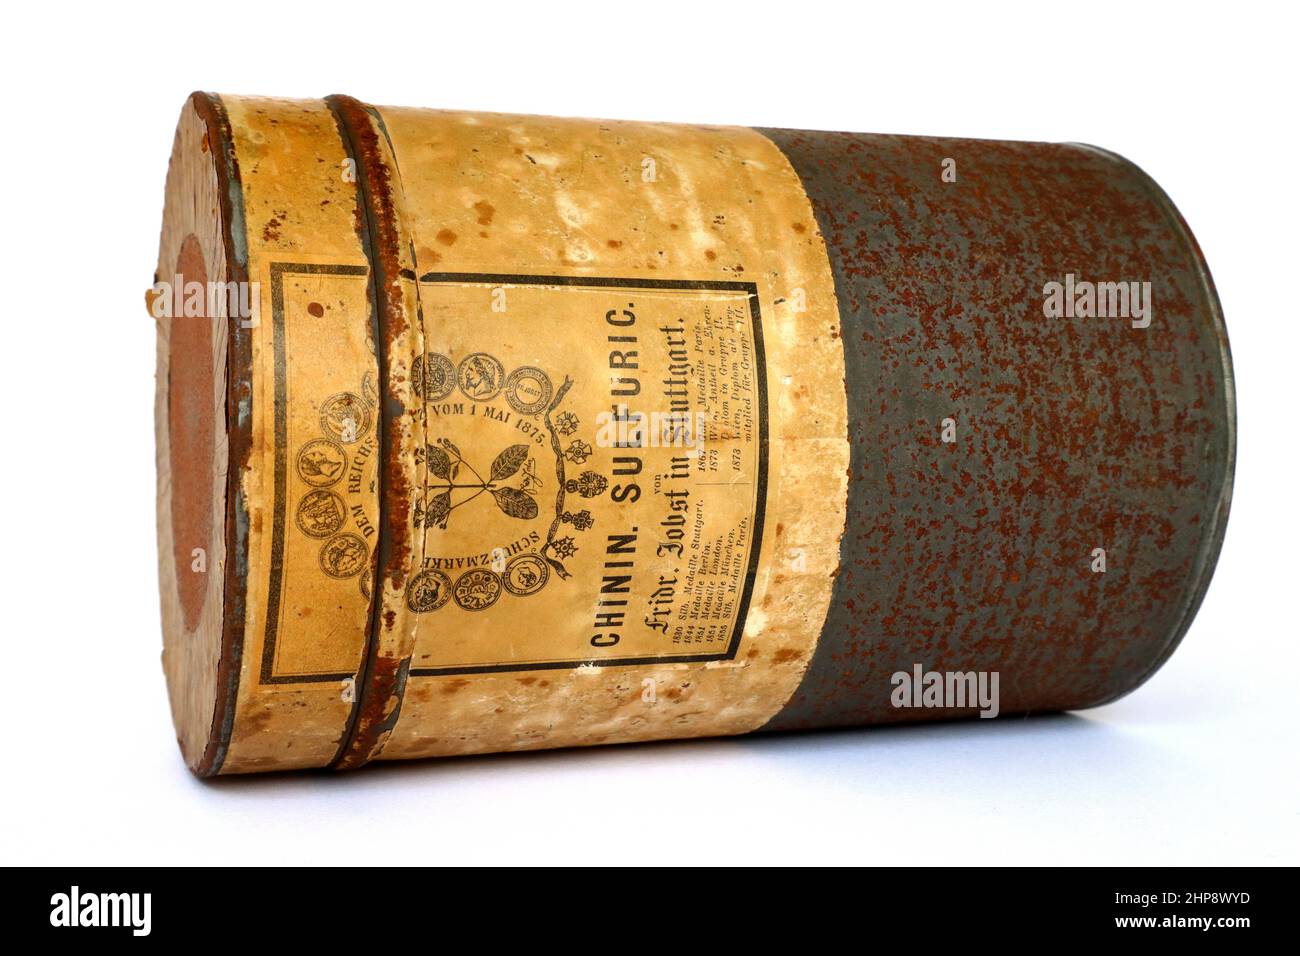 Vintage 1880s CHININ SULFURIC Fridr. Jobst, Quinine Sulphate medicine for the treatment of Malaria. FRIDRICH JOBST in Stuttgart (Germany) Stock Photo